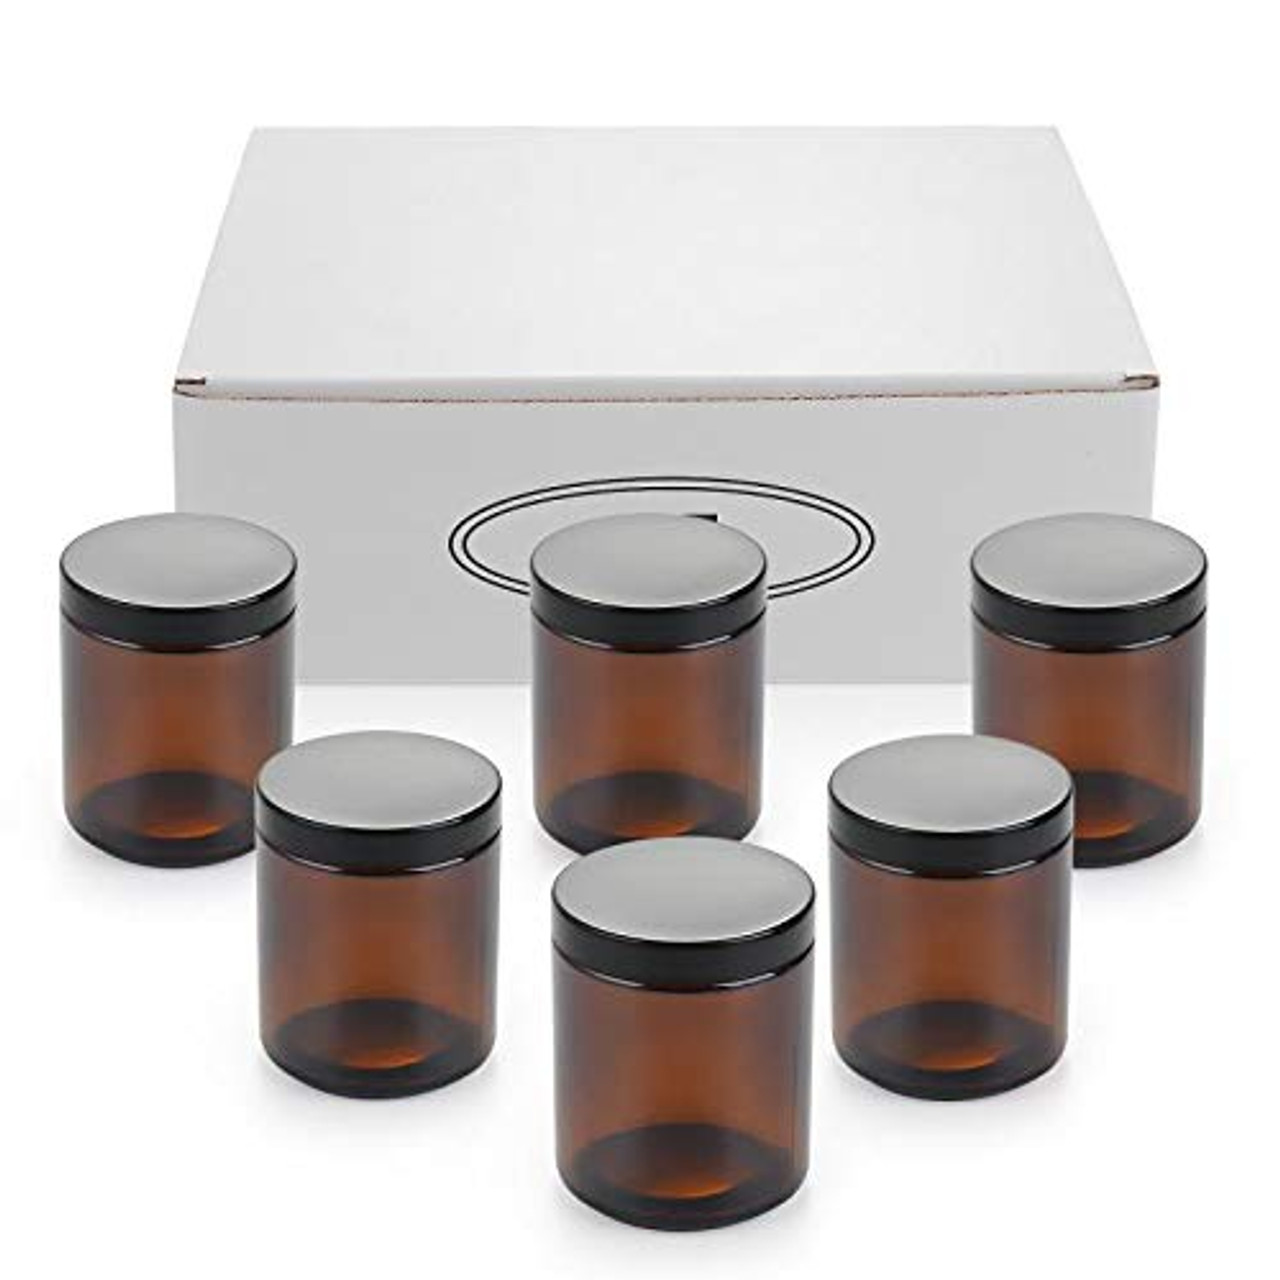 6pk 8oz Glass Jars With Lids Candles Cosmetic Container Makeup Storage Jars  Empty Wide Mouth Clear Amber Glass Jars Black Lid 